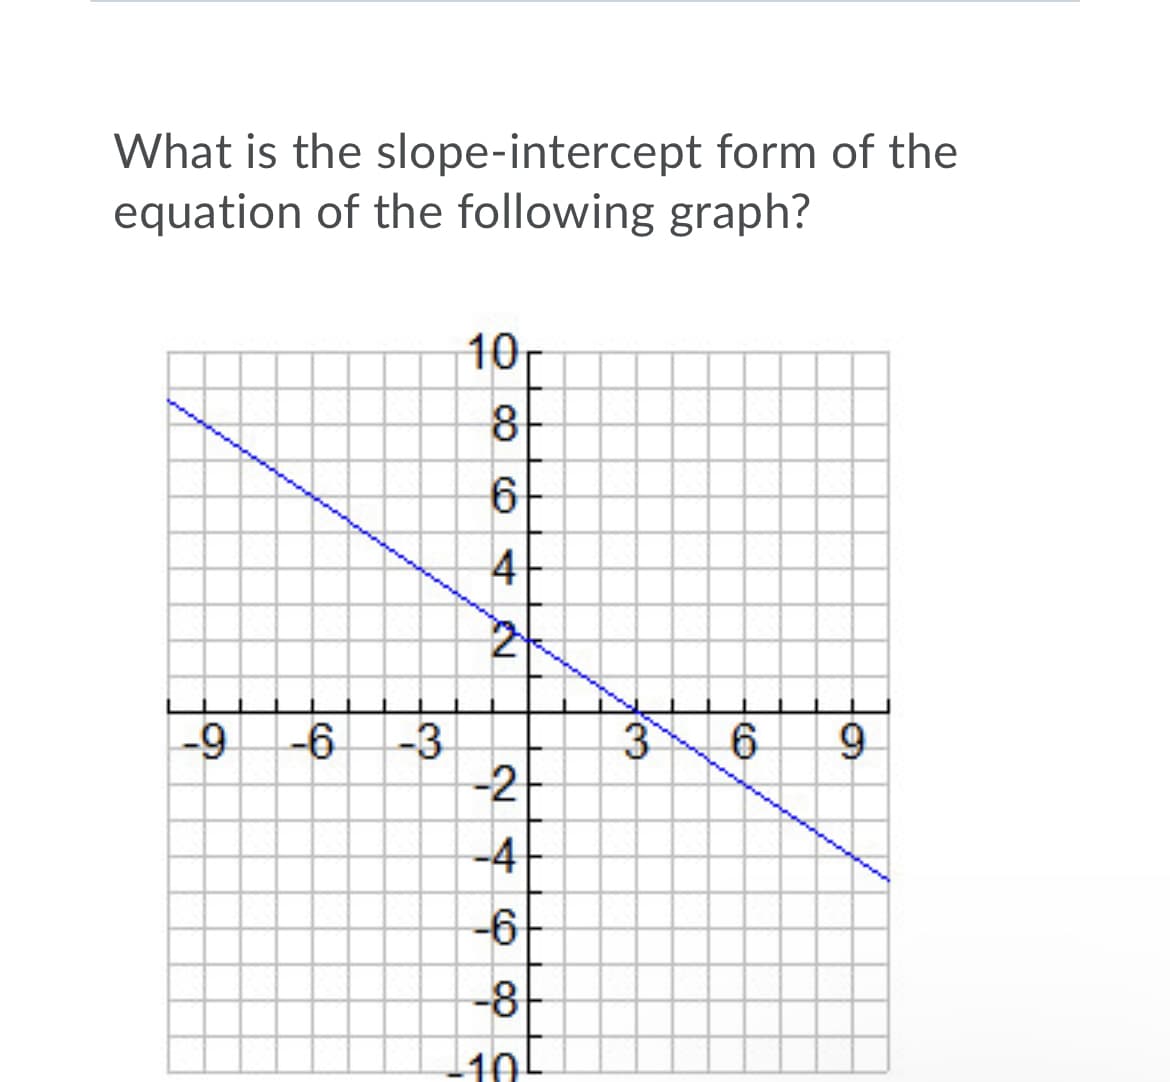 What is the slope-intercept form of the
equation of the following graph?
10
8.
2-
-9 -6
3
-3
-2
9
-4
-6
-8
l10
64
